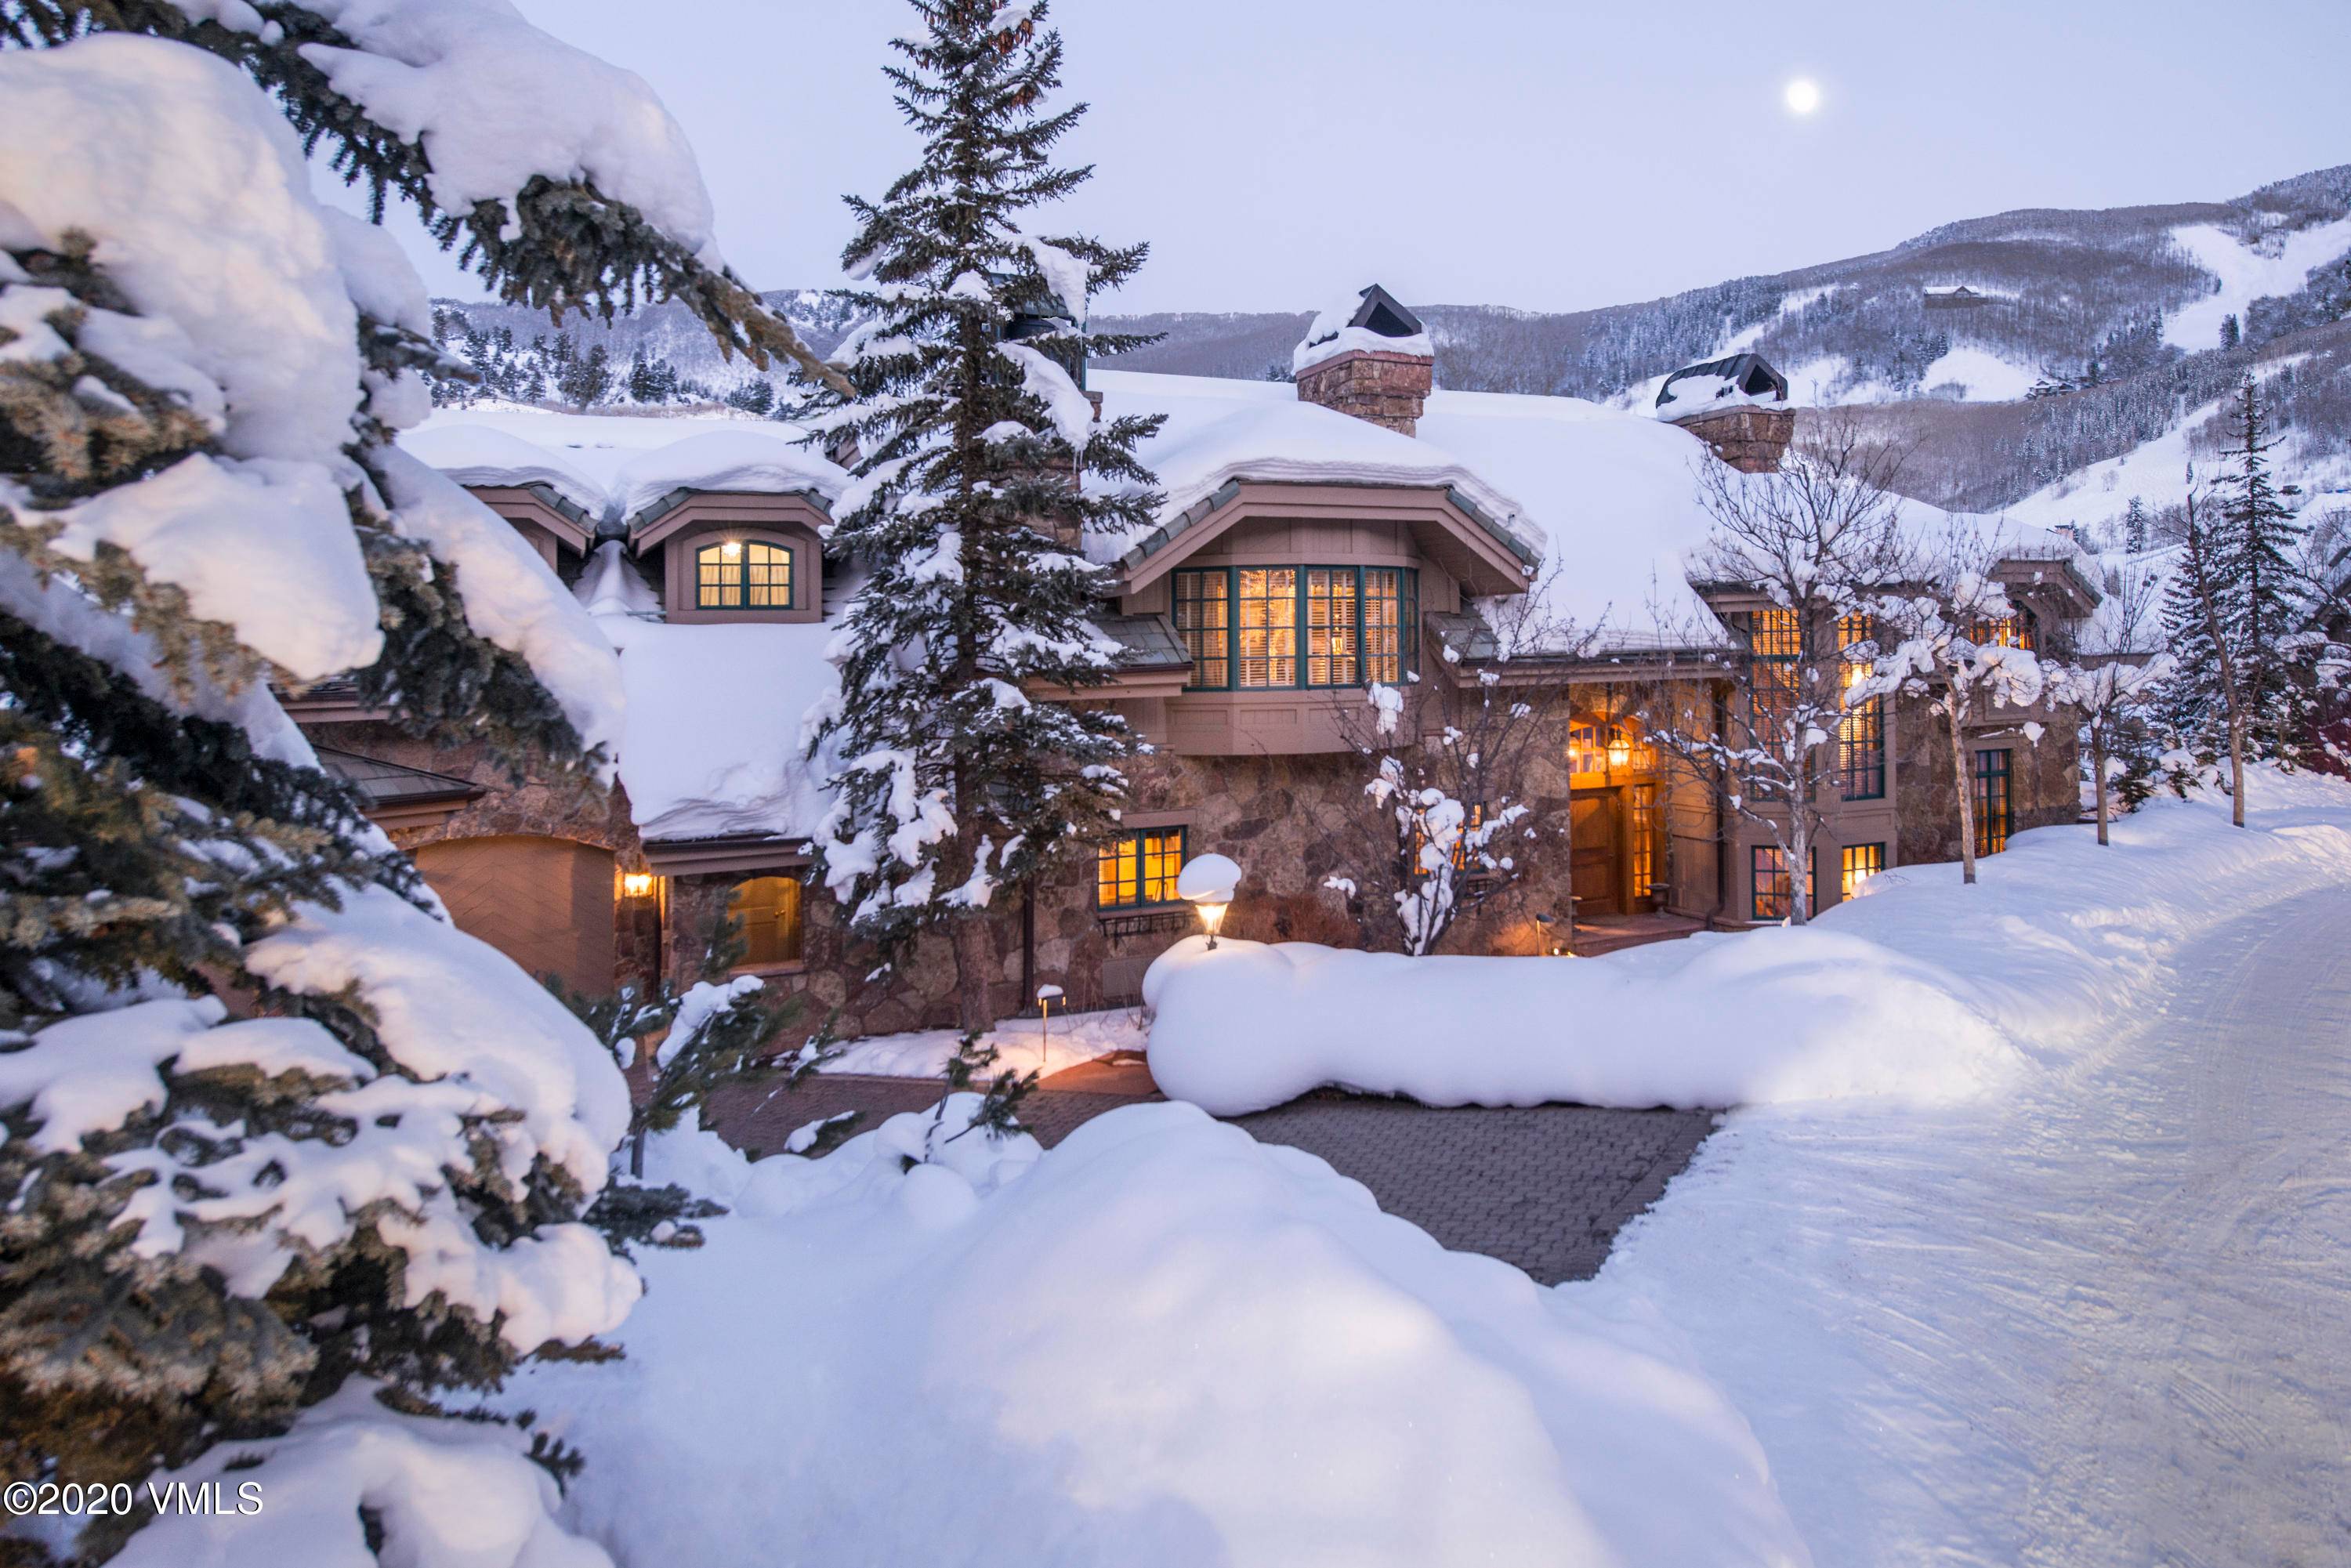 Take advantage of this incredible opportunity to own one of the eight exclusive single family residences within the coveted gates of the Chateau at Beaver Creek.